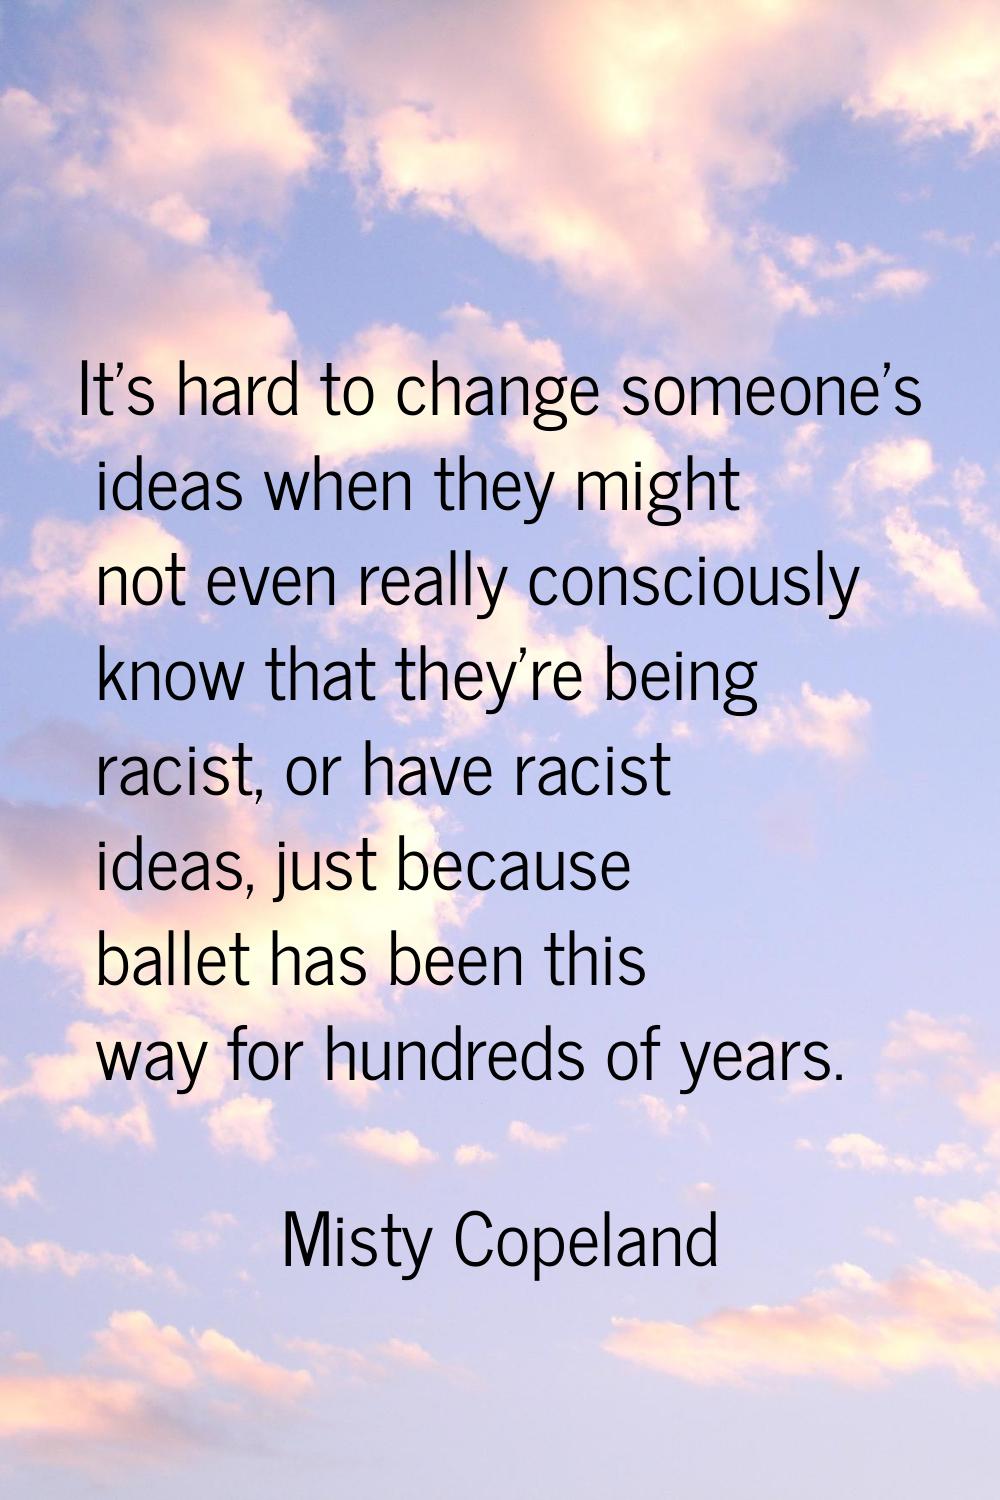 It's hard to change someone's ideas when they might not even really consciously know that they're b